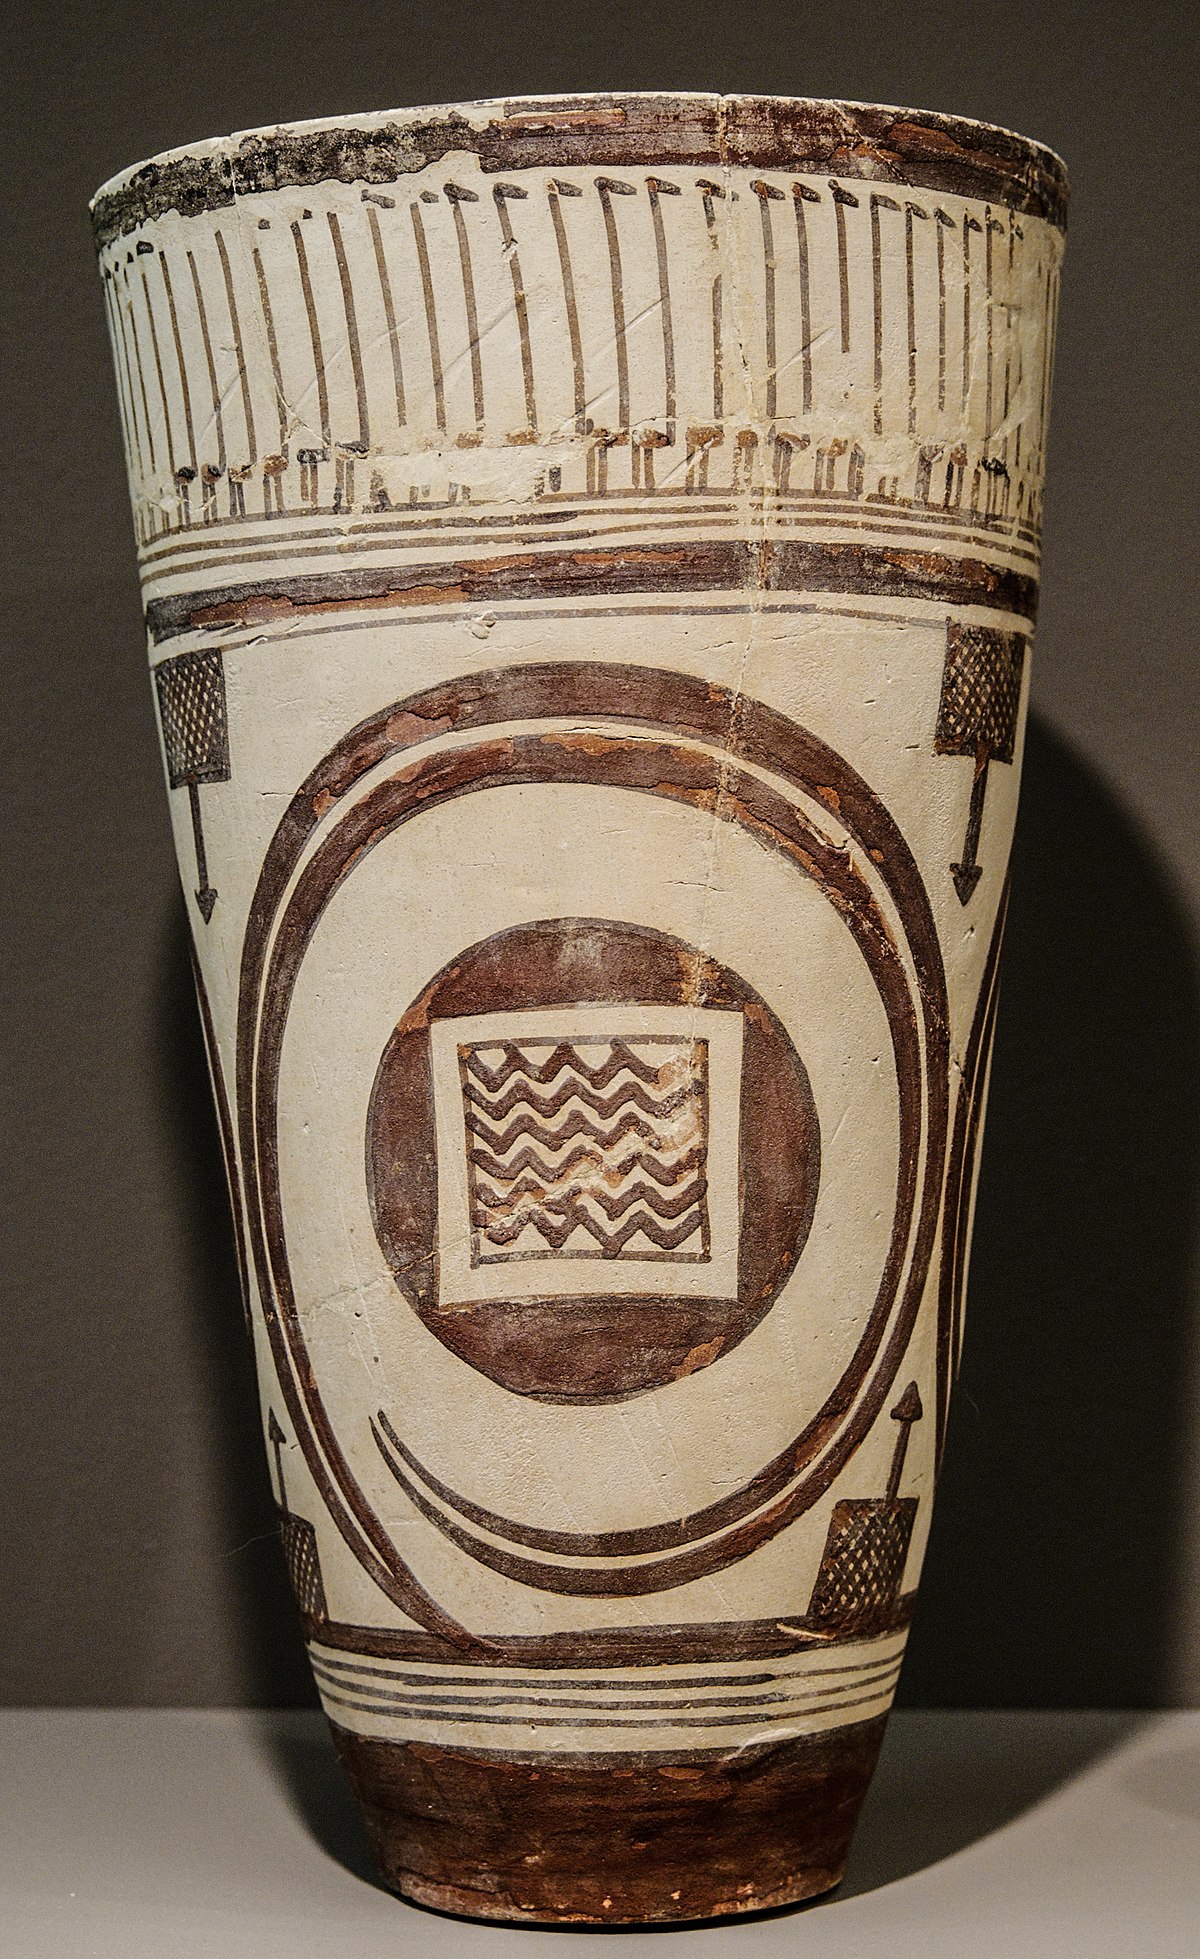 <p>It is a beaker that has ibex motifs on it. The ibex is a type of wild goat that was often depicted in ancient art. This beaker was likely used for drinking or storing liquids. It was made by skilled artisans in ancient times and is now a valuable artifact for archaeologists to study.</p>